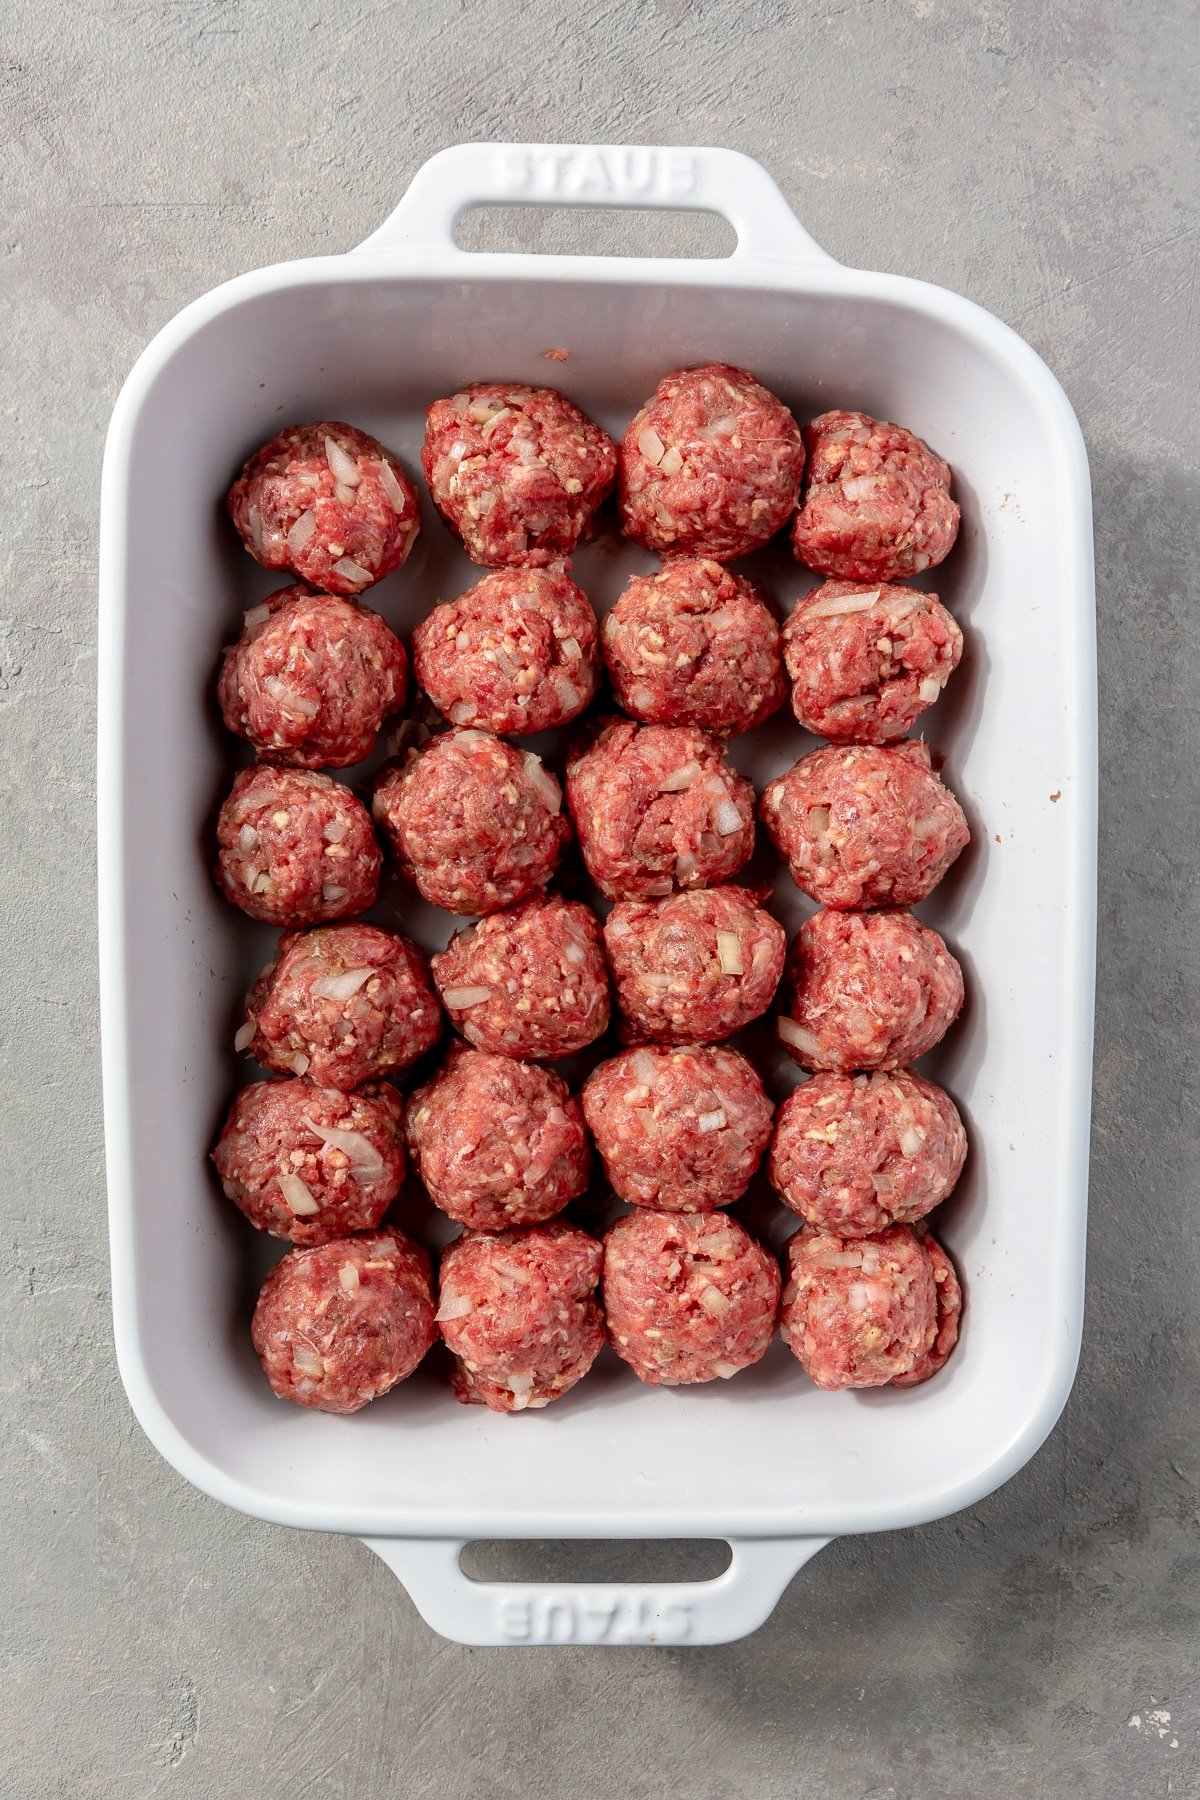 1 inch round meatballs fill the bottom of a white baking dish.